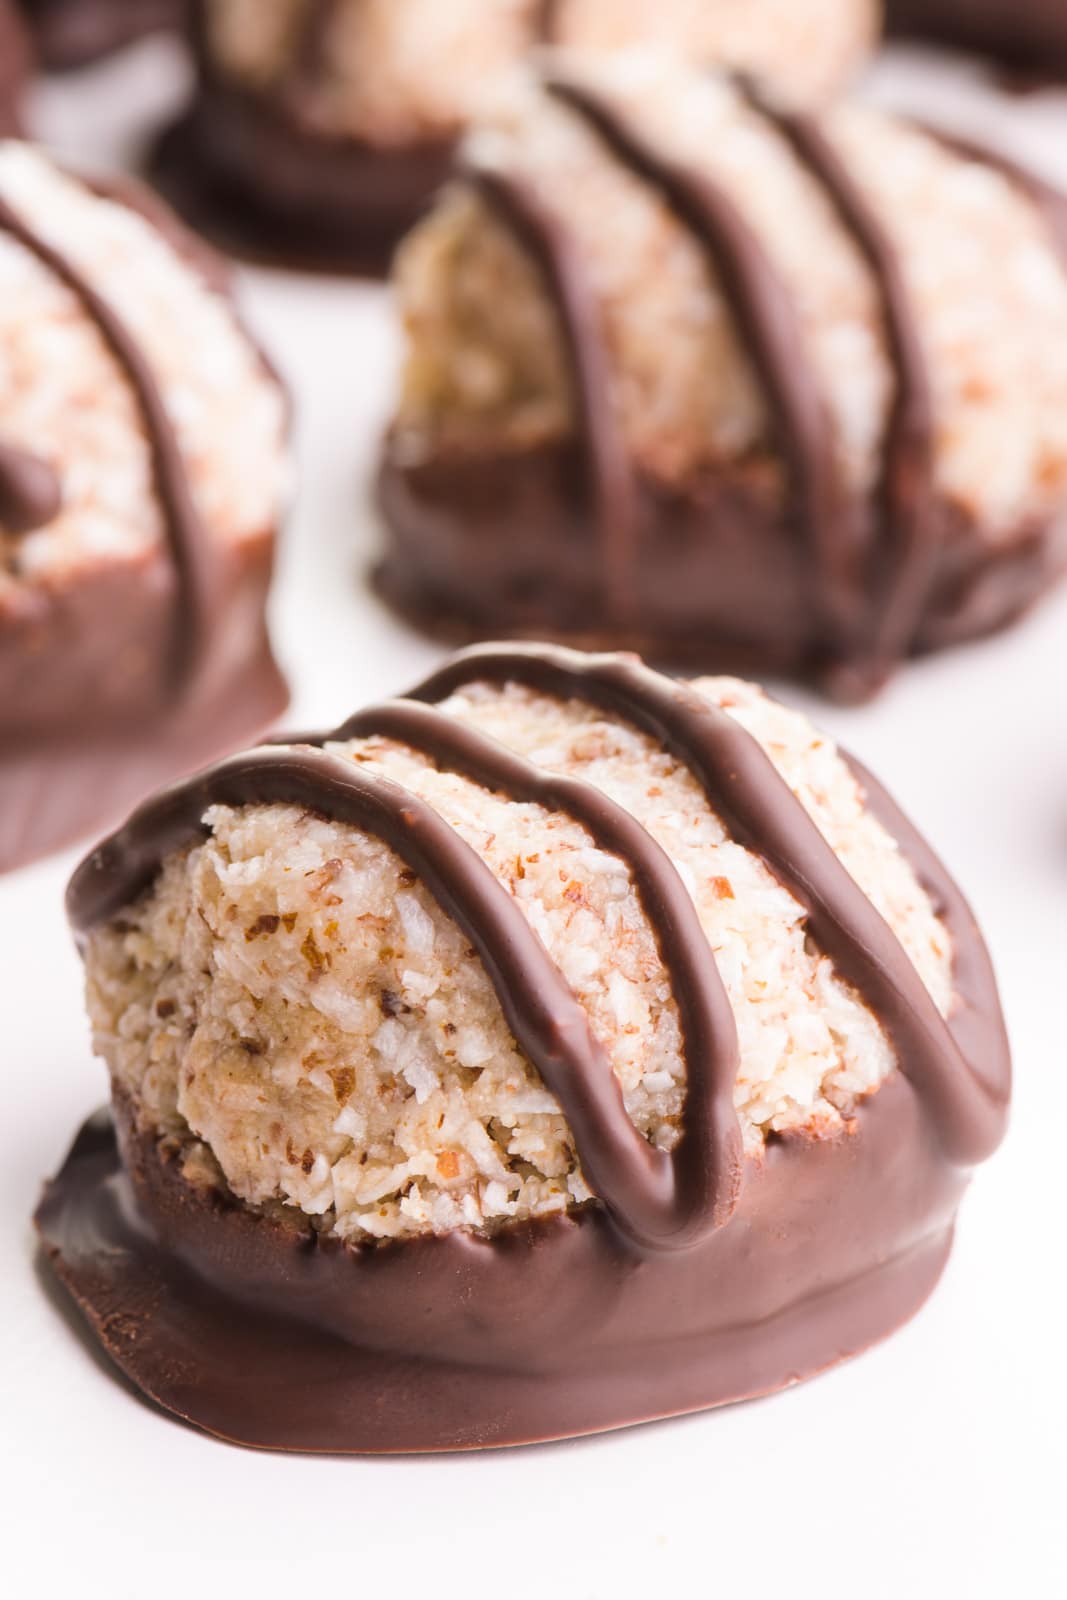 A chocolate coconut macaroon cookie has chocolate drizzles over the top and sits in front of more of the cookies.